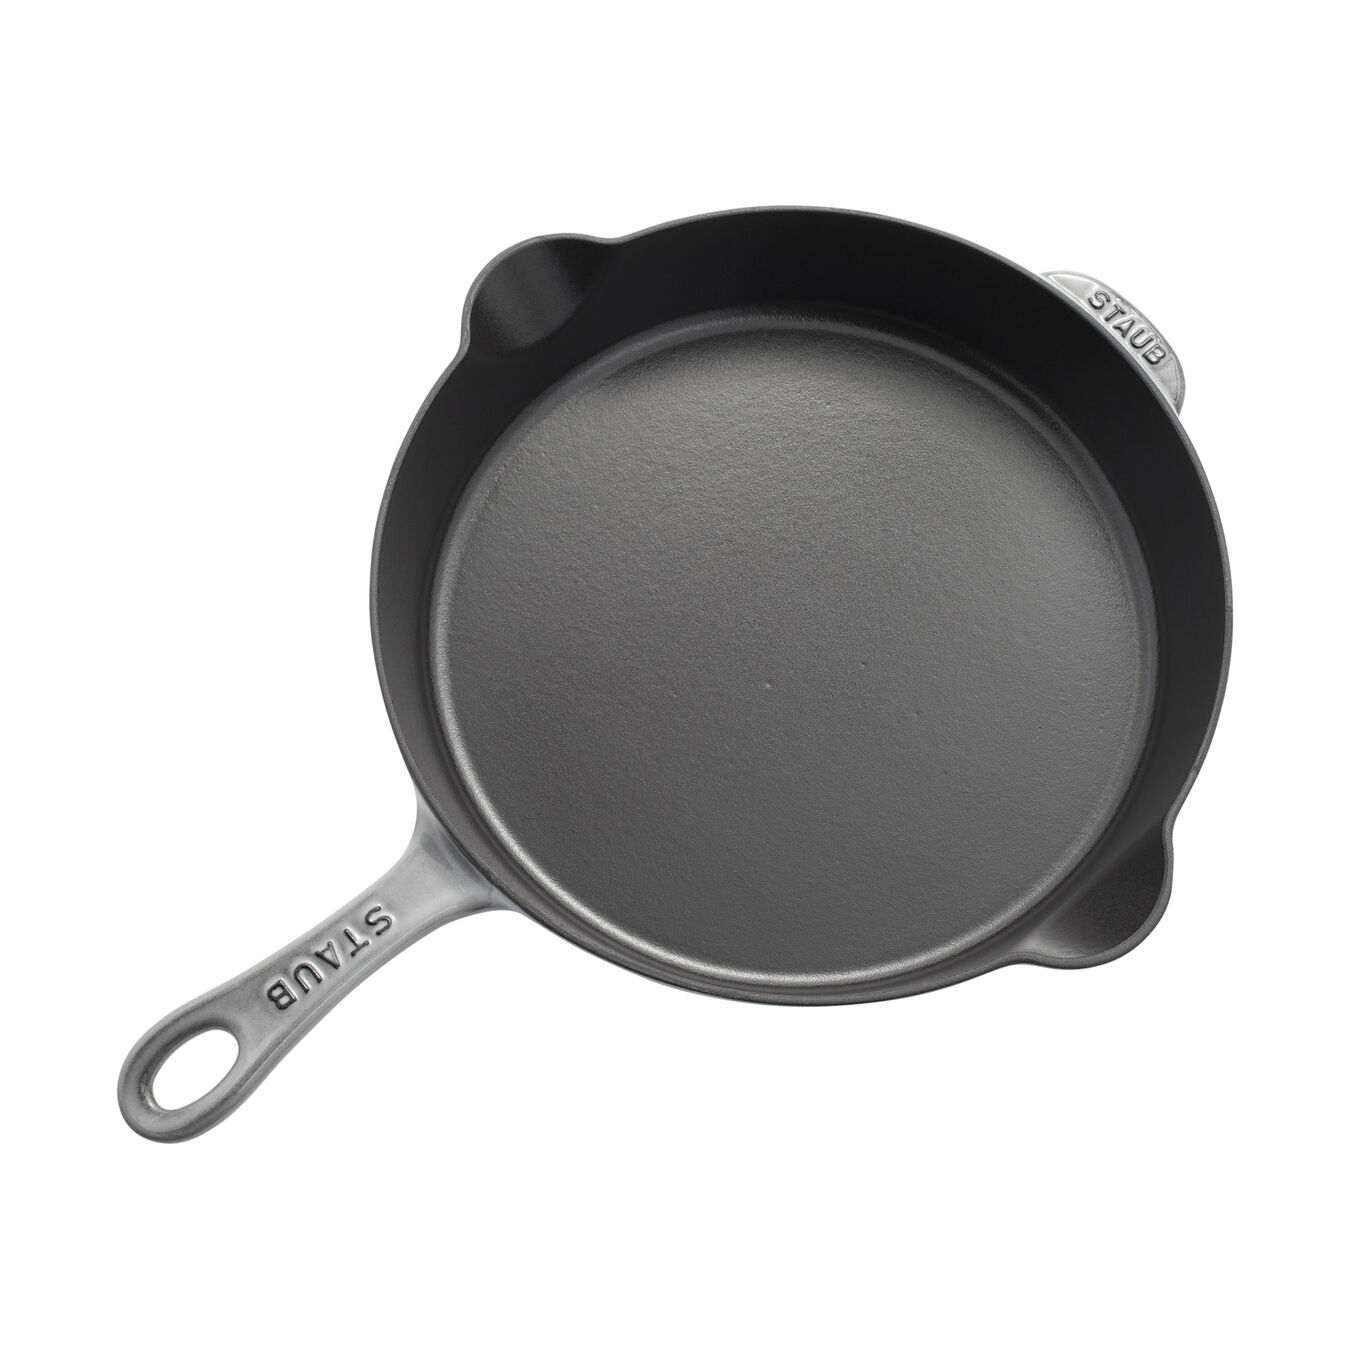 28 cm / 11 inch cast iron Frying pan, graphite-grey - Visual Imperfections,,large 2